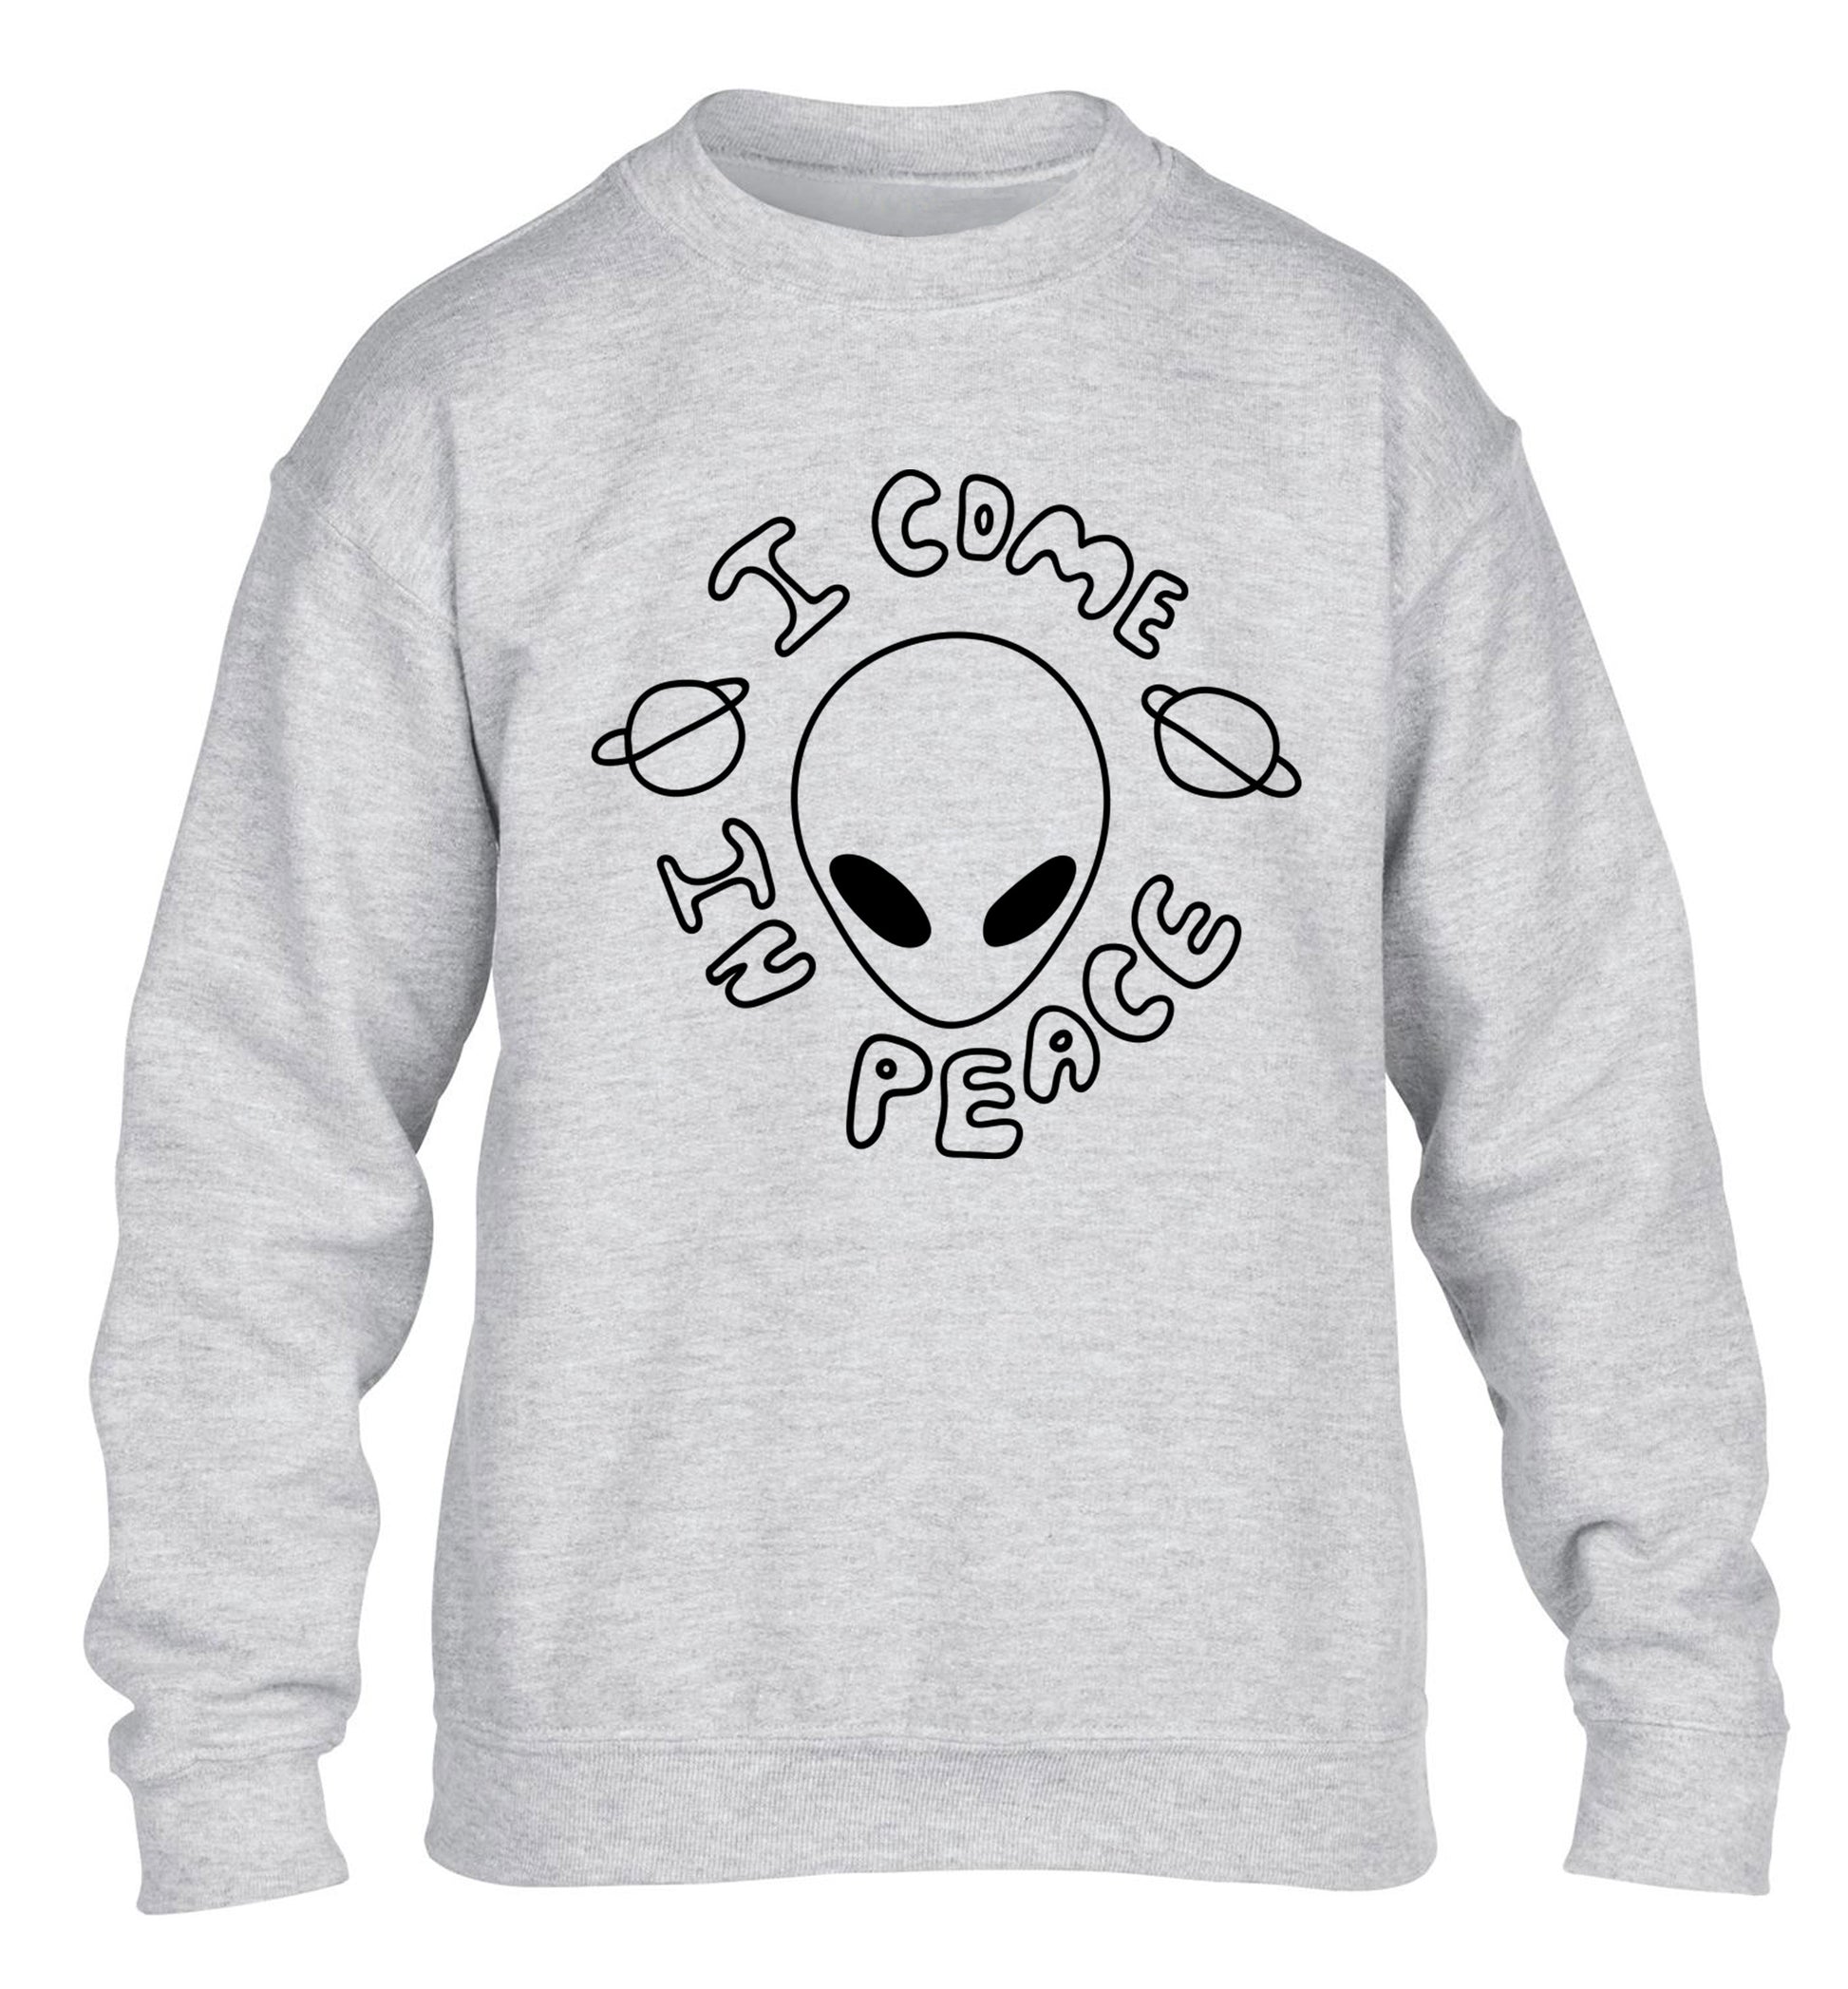 I come in peace children's grey sweater 12-14 Years